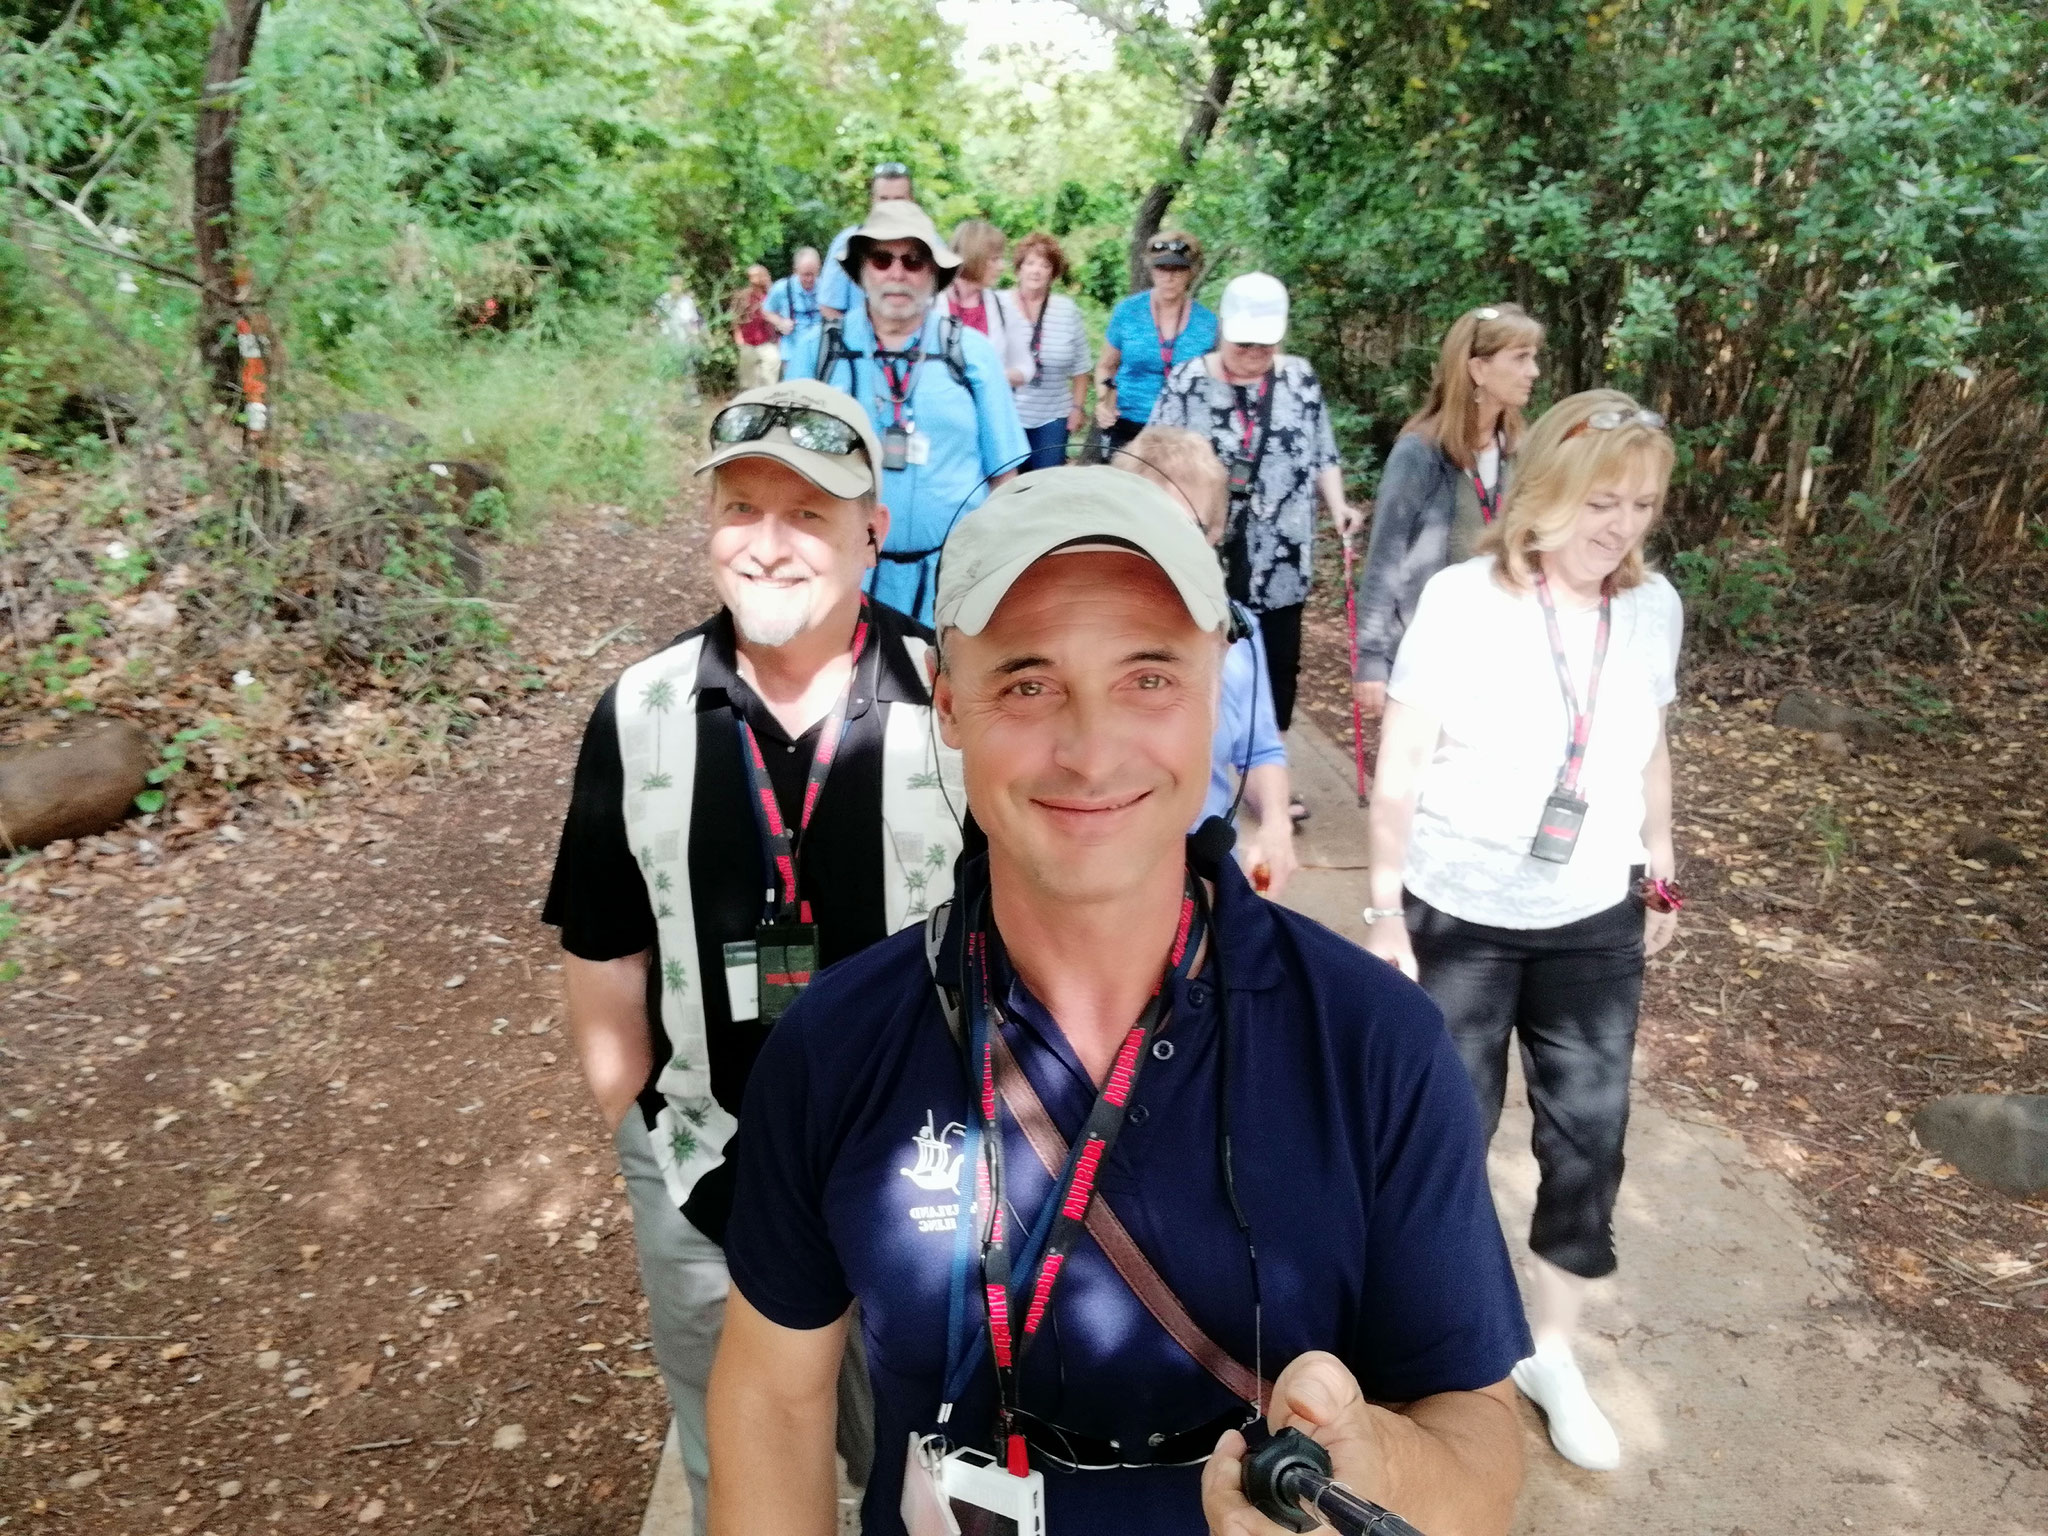 On the path with the group from Texas, 2018